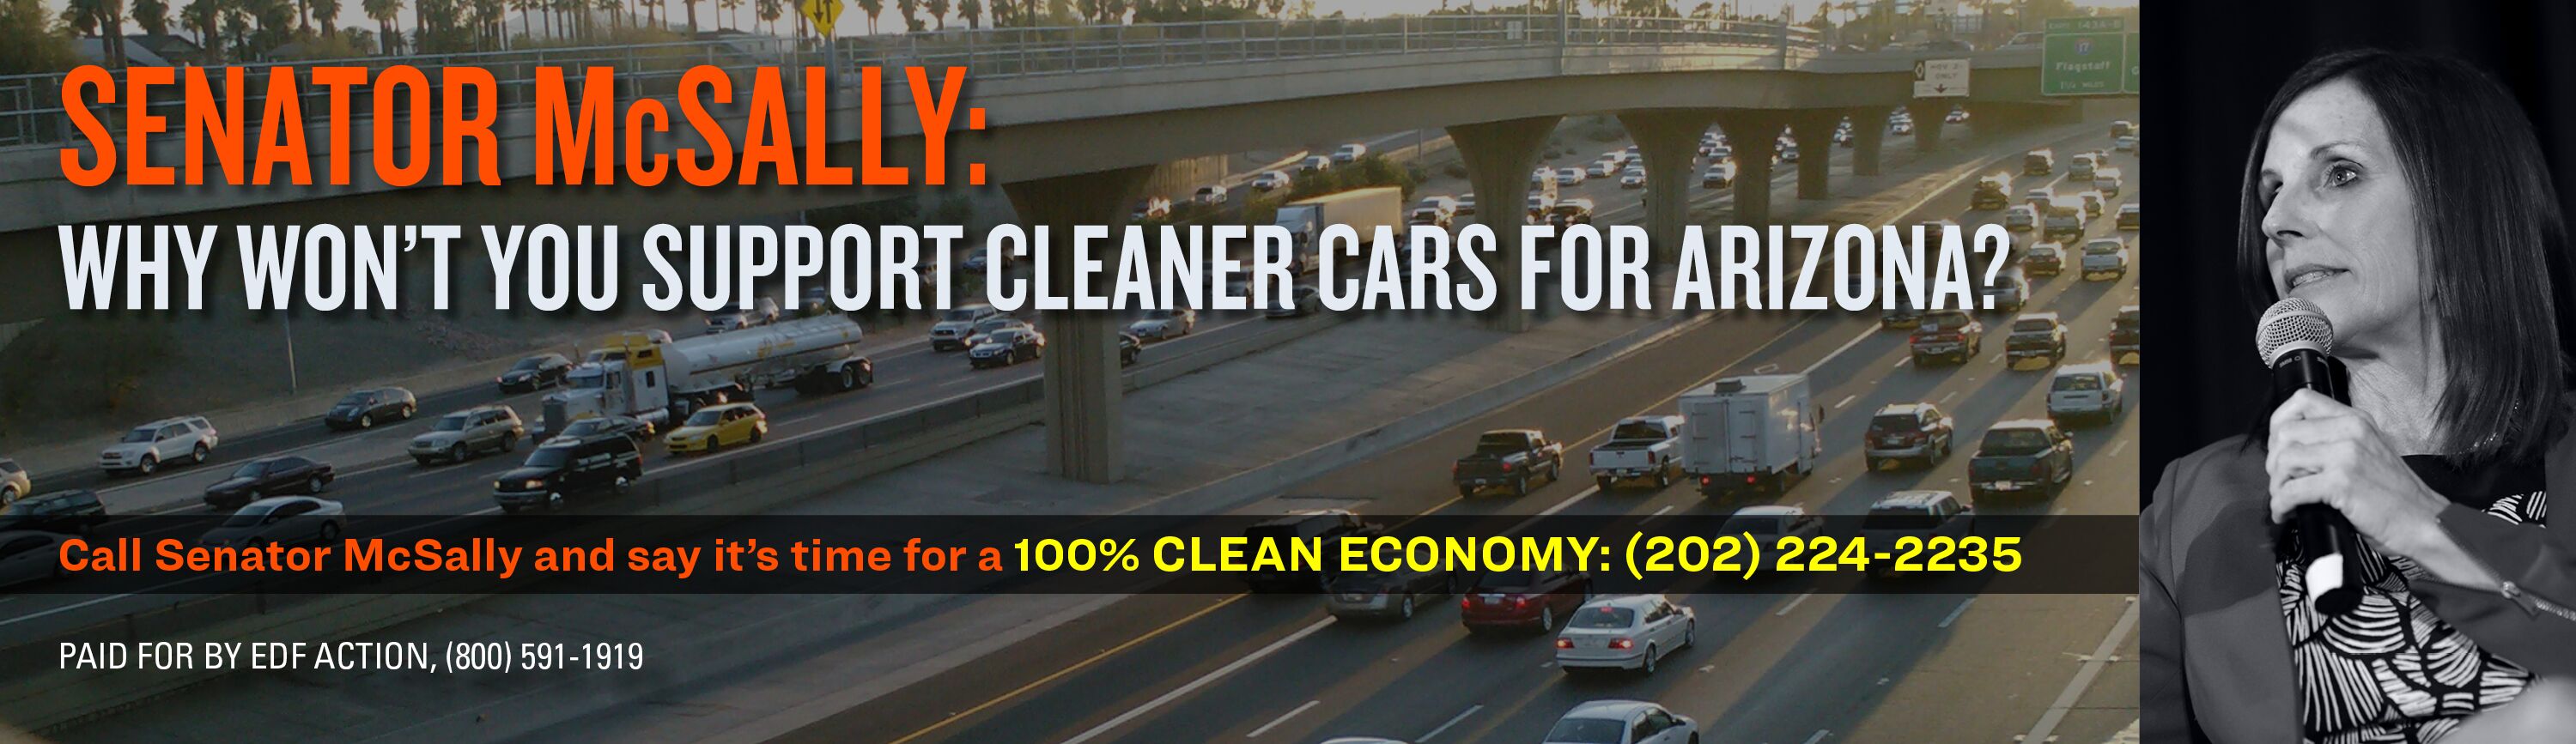 Senator McSally, why won't you support clean cars.